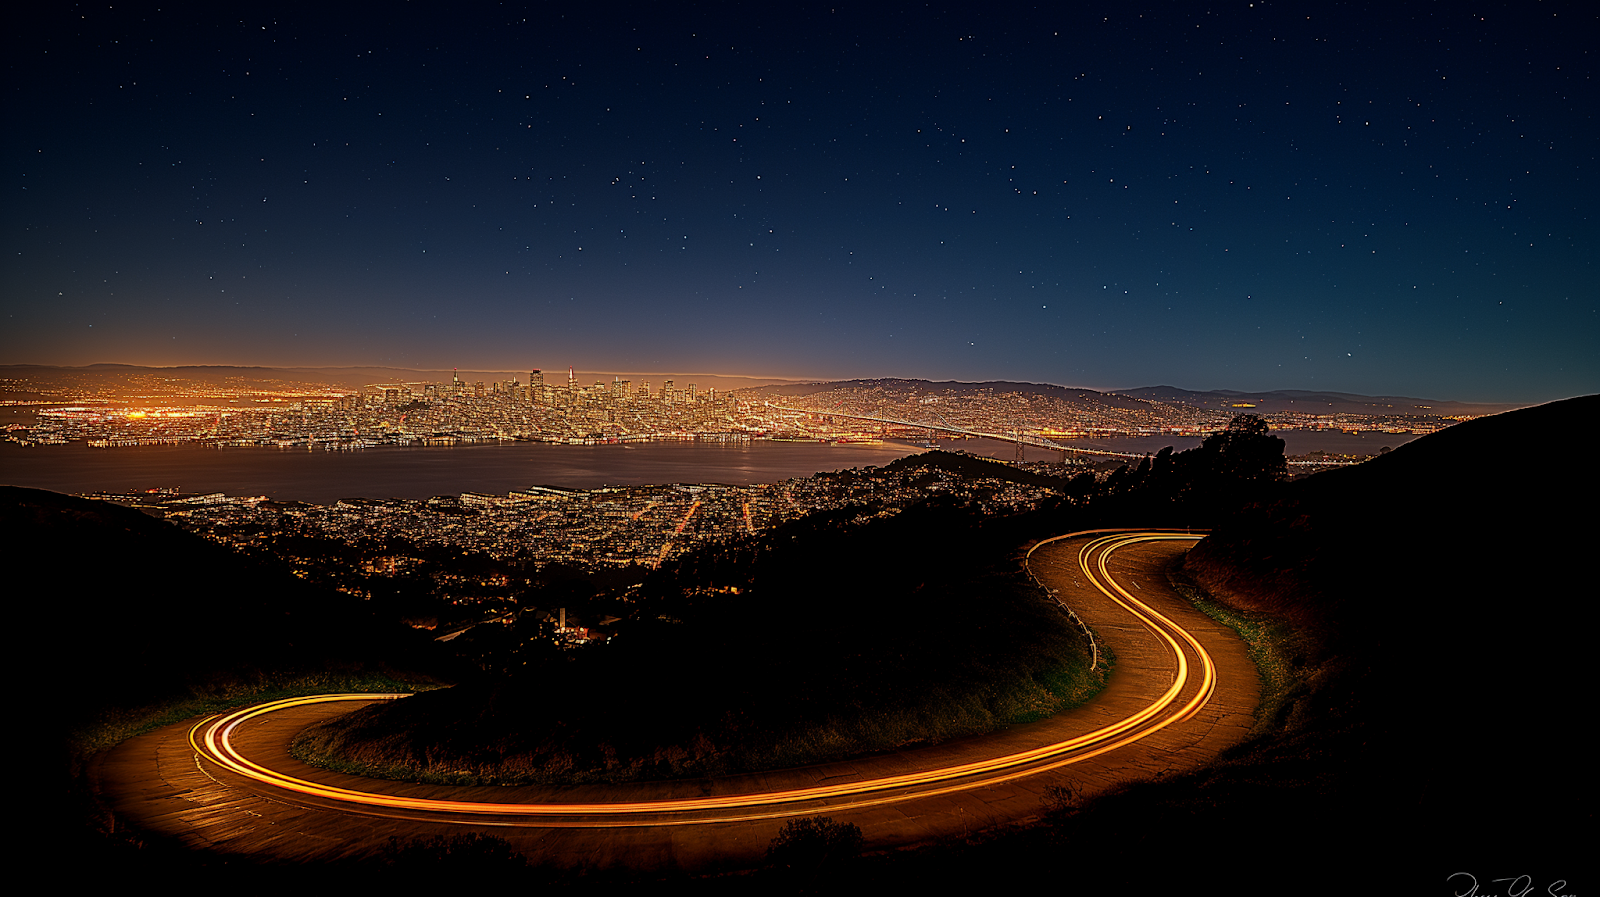 Twilight descends on San Francisco, viewed from the scenic vantage point of Twin Peaks.